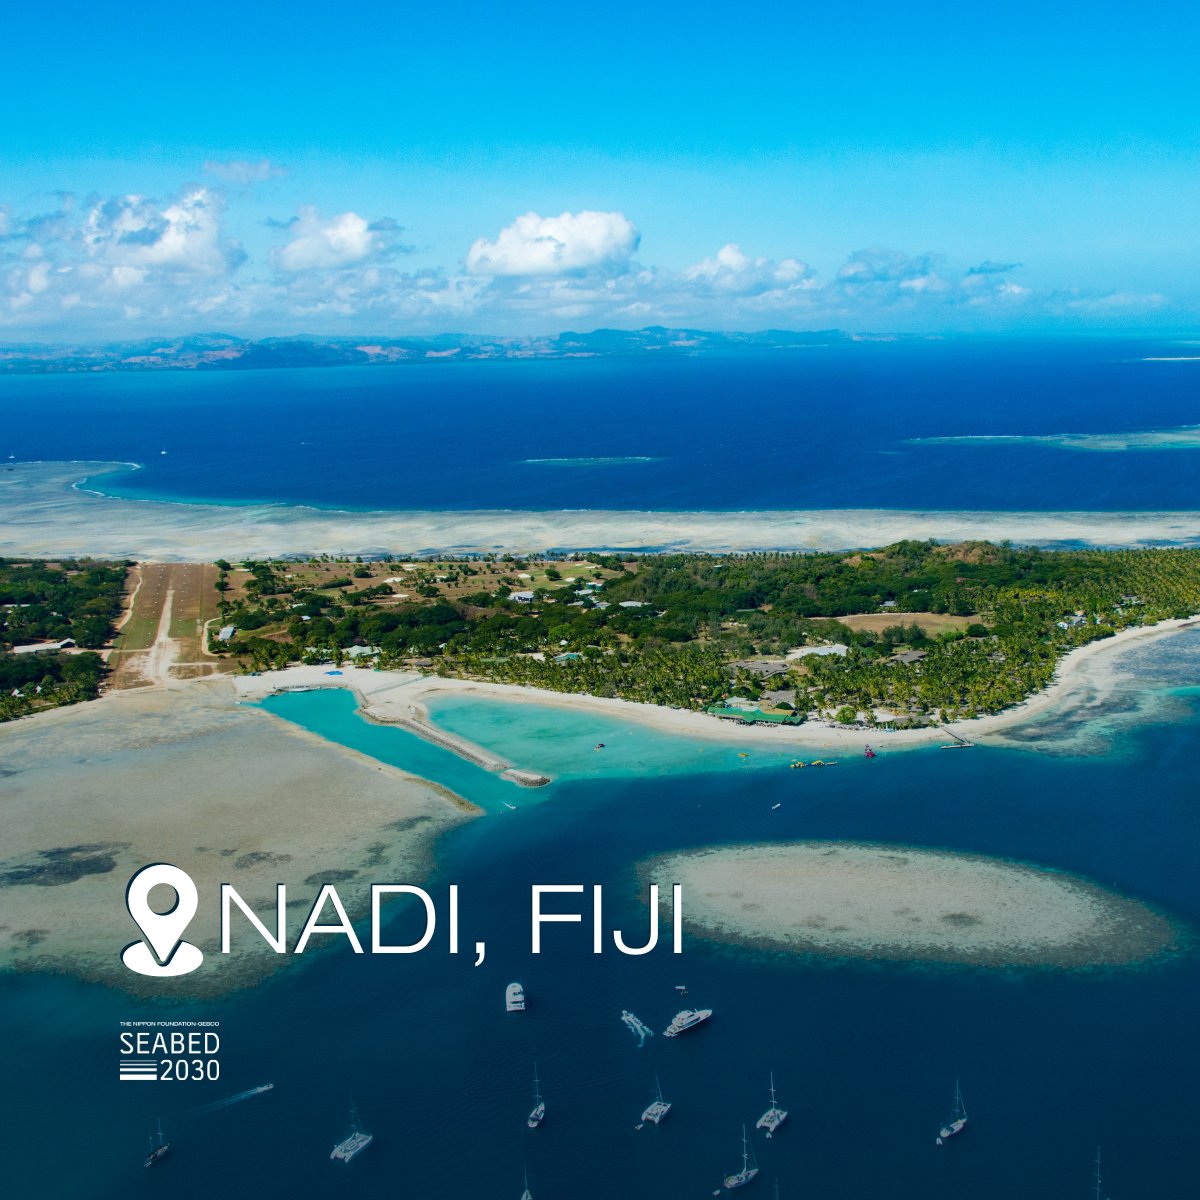 📣 Mark your diaries! Our 6th Pacific #Ocean #Mapping Meeting will be held on 4-6 November in Nadi, Fiji with: 👉 An in-person workshop on 4 November 👉 A hybrid conference 5 and 6 November Registration is now open ➡️ survey123.arcgis.com/share/6dc81d59…